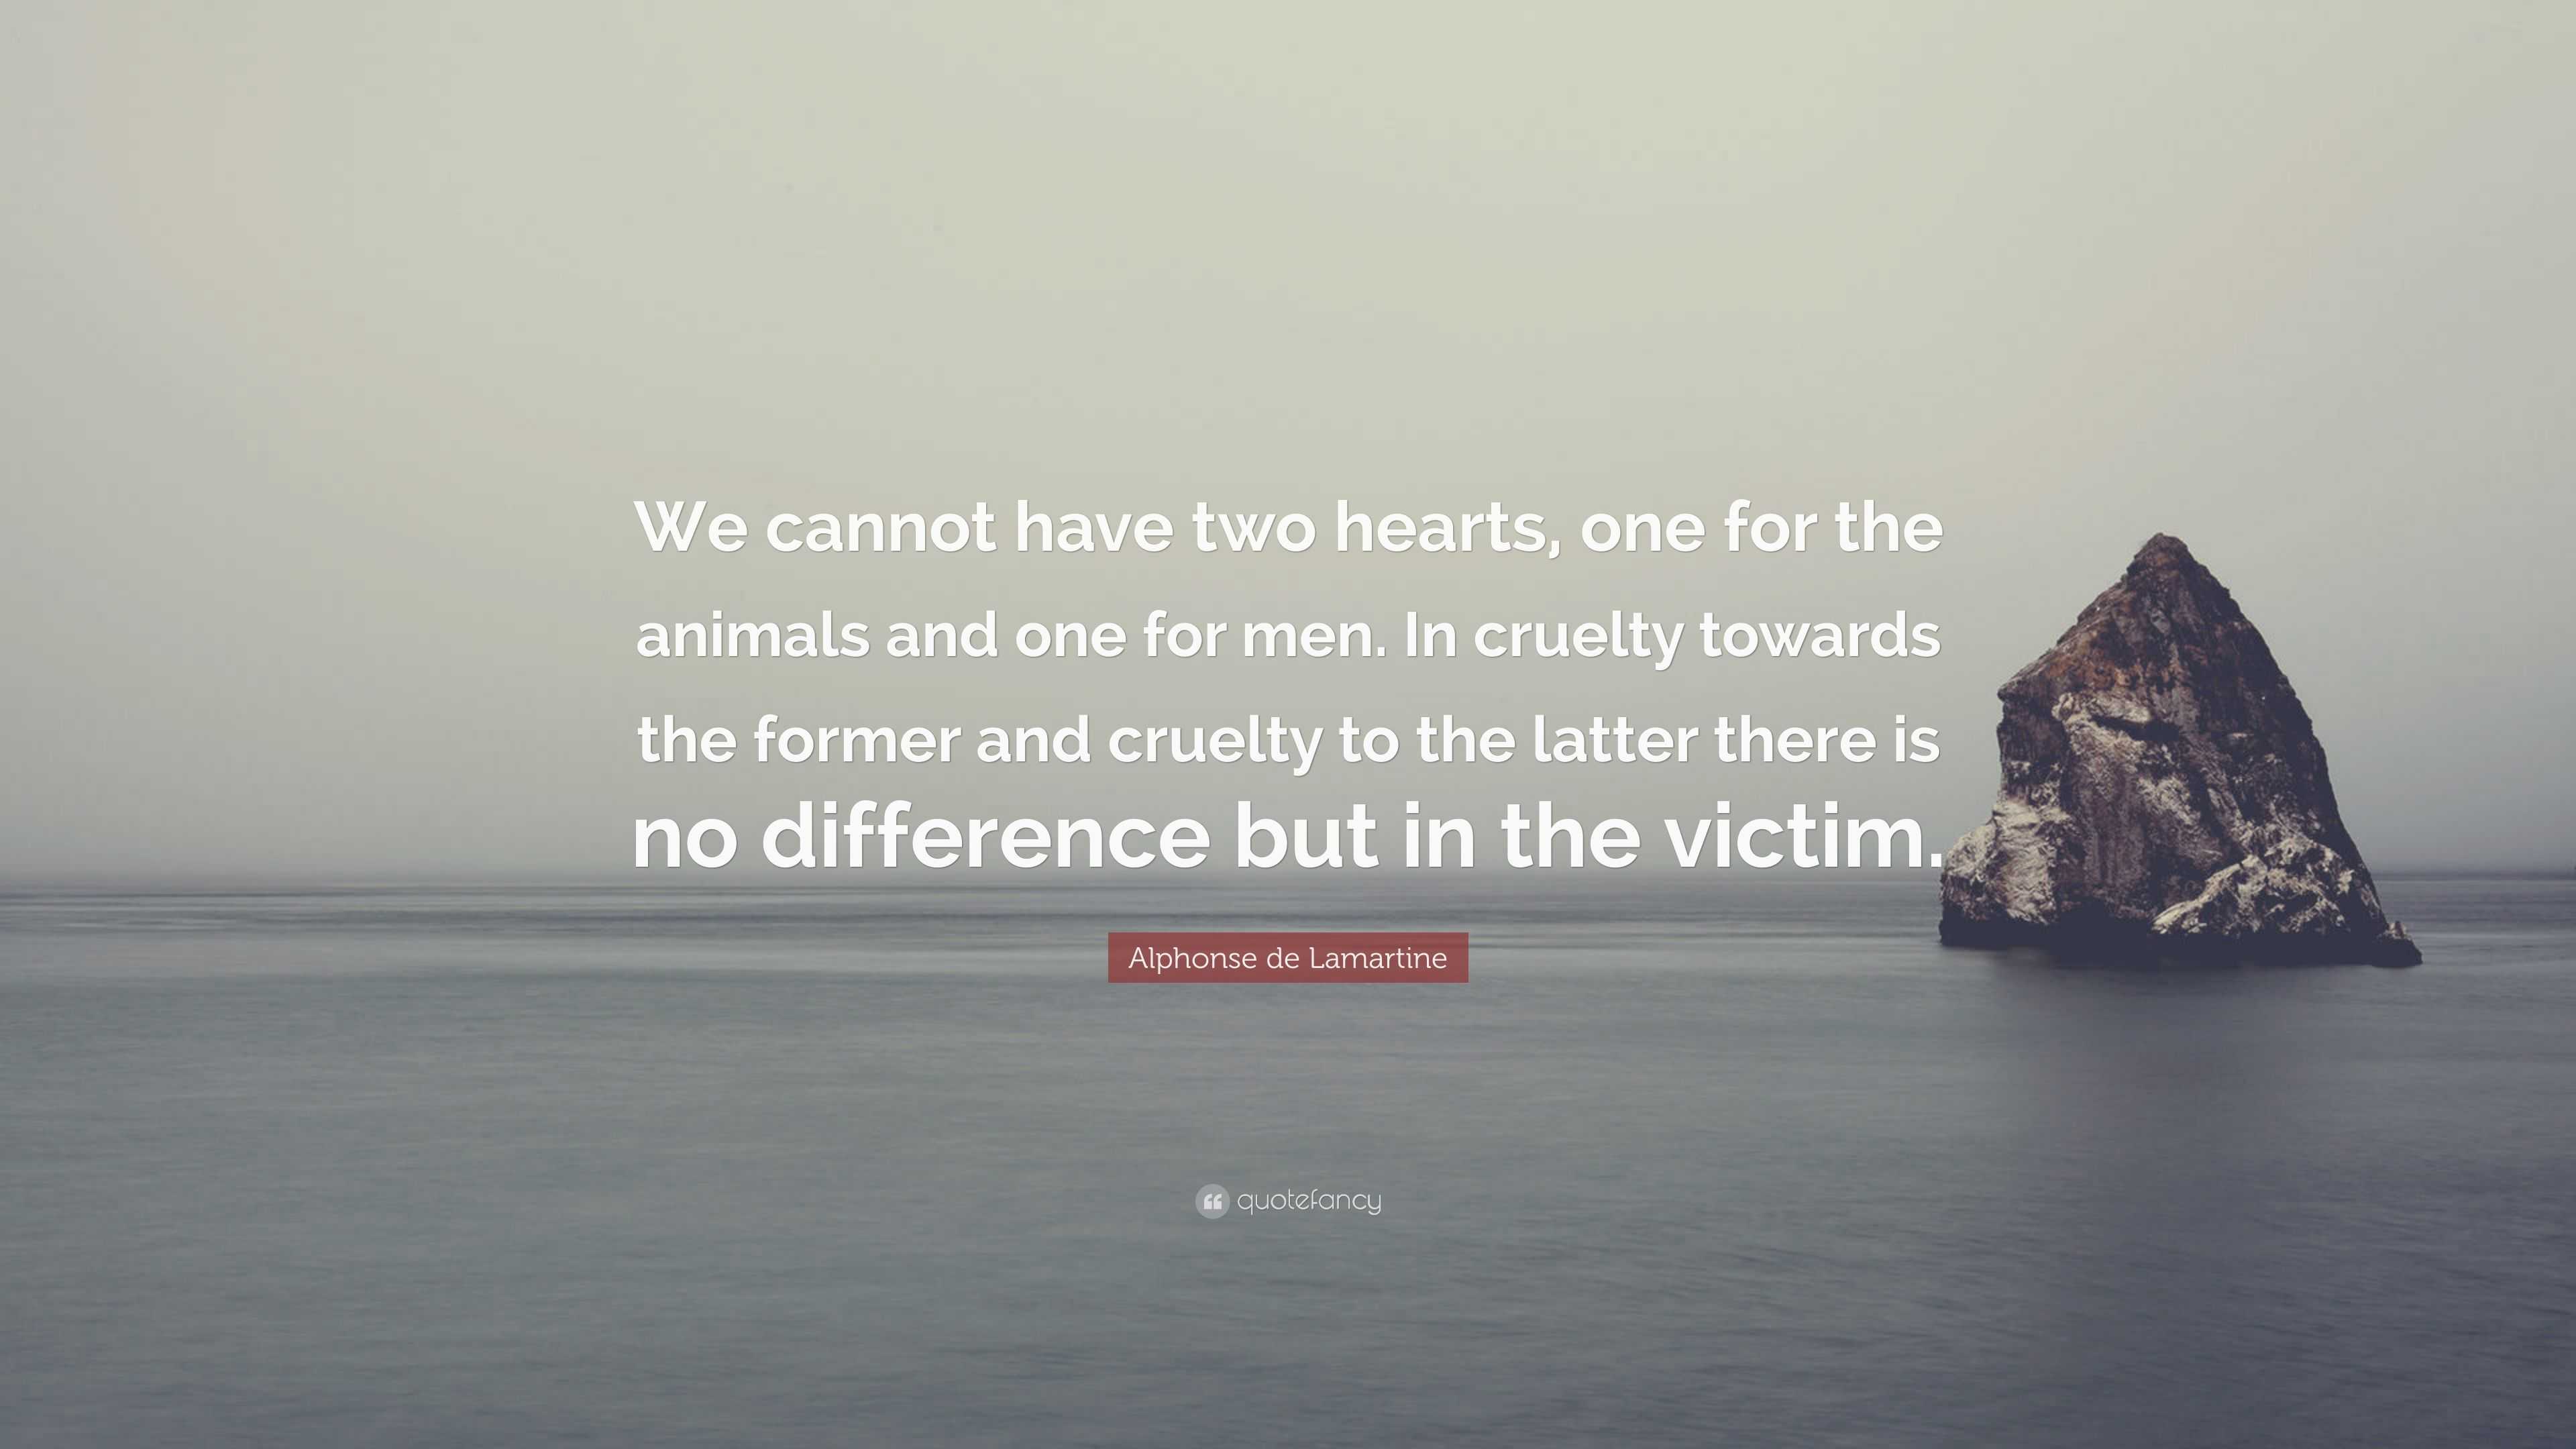 Alphonse de Lamartine Quote: “We cannot have two hearts, one for the animals  and one for men. In cruelty towards the former and cruelty to the latter  ...”